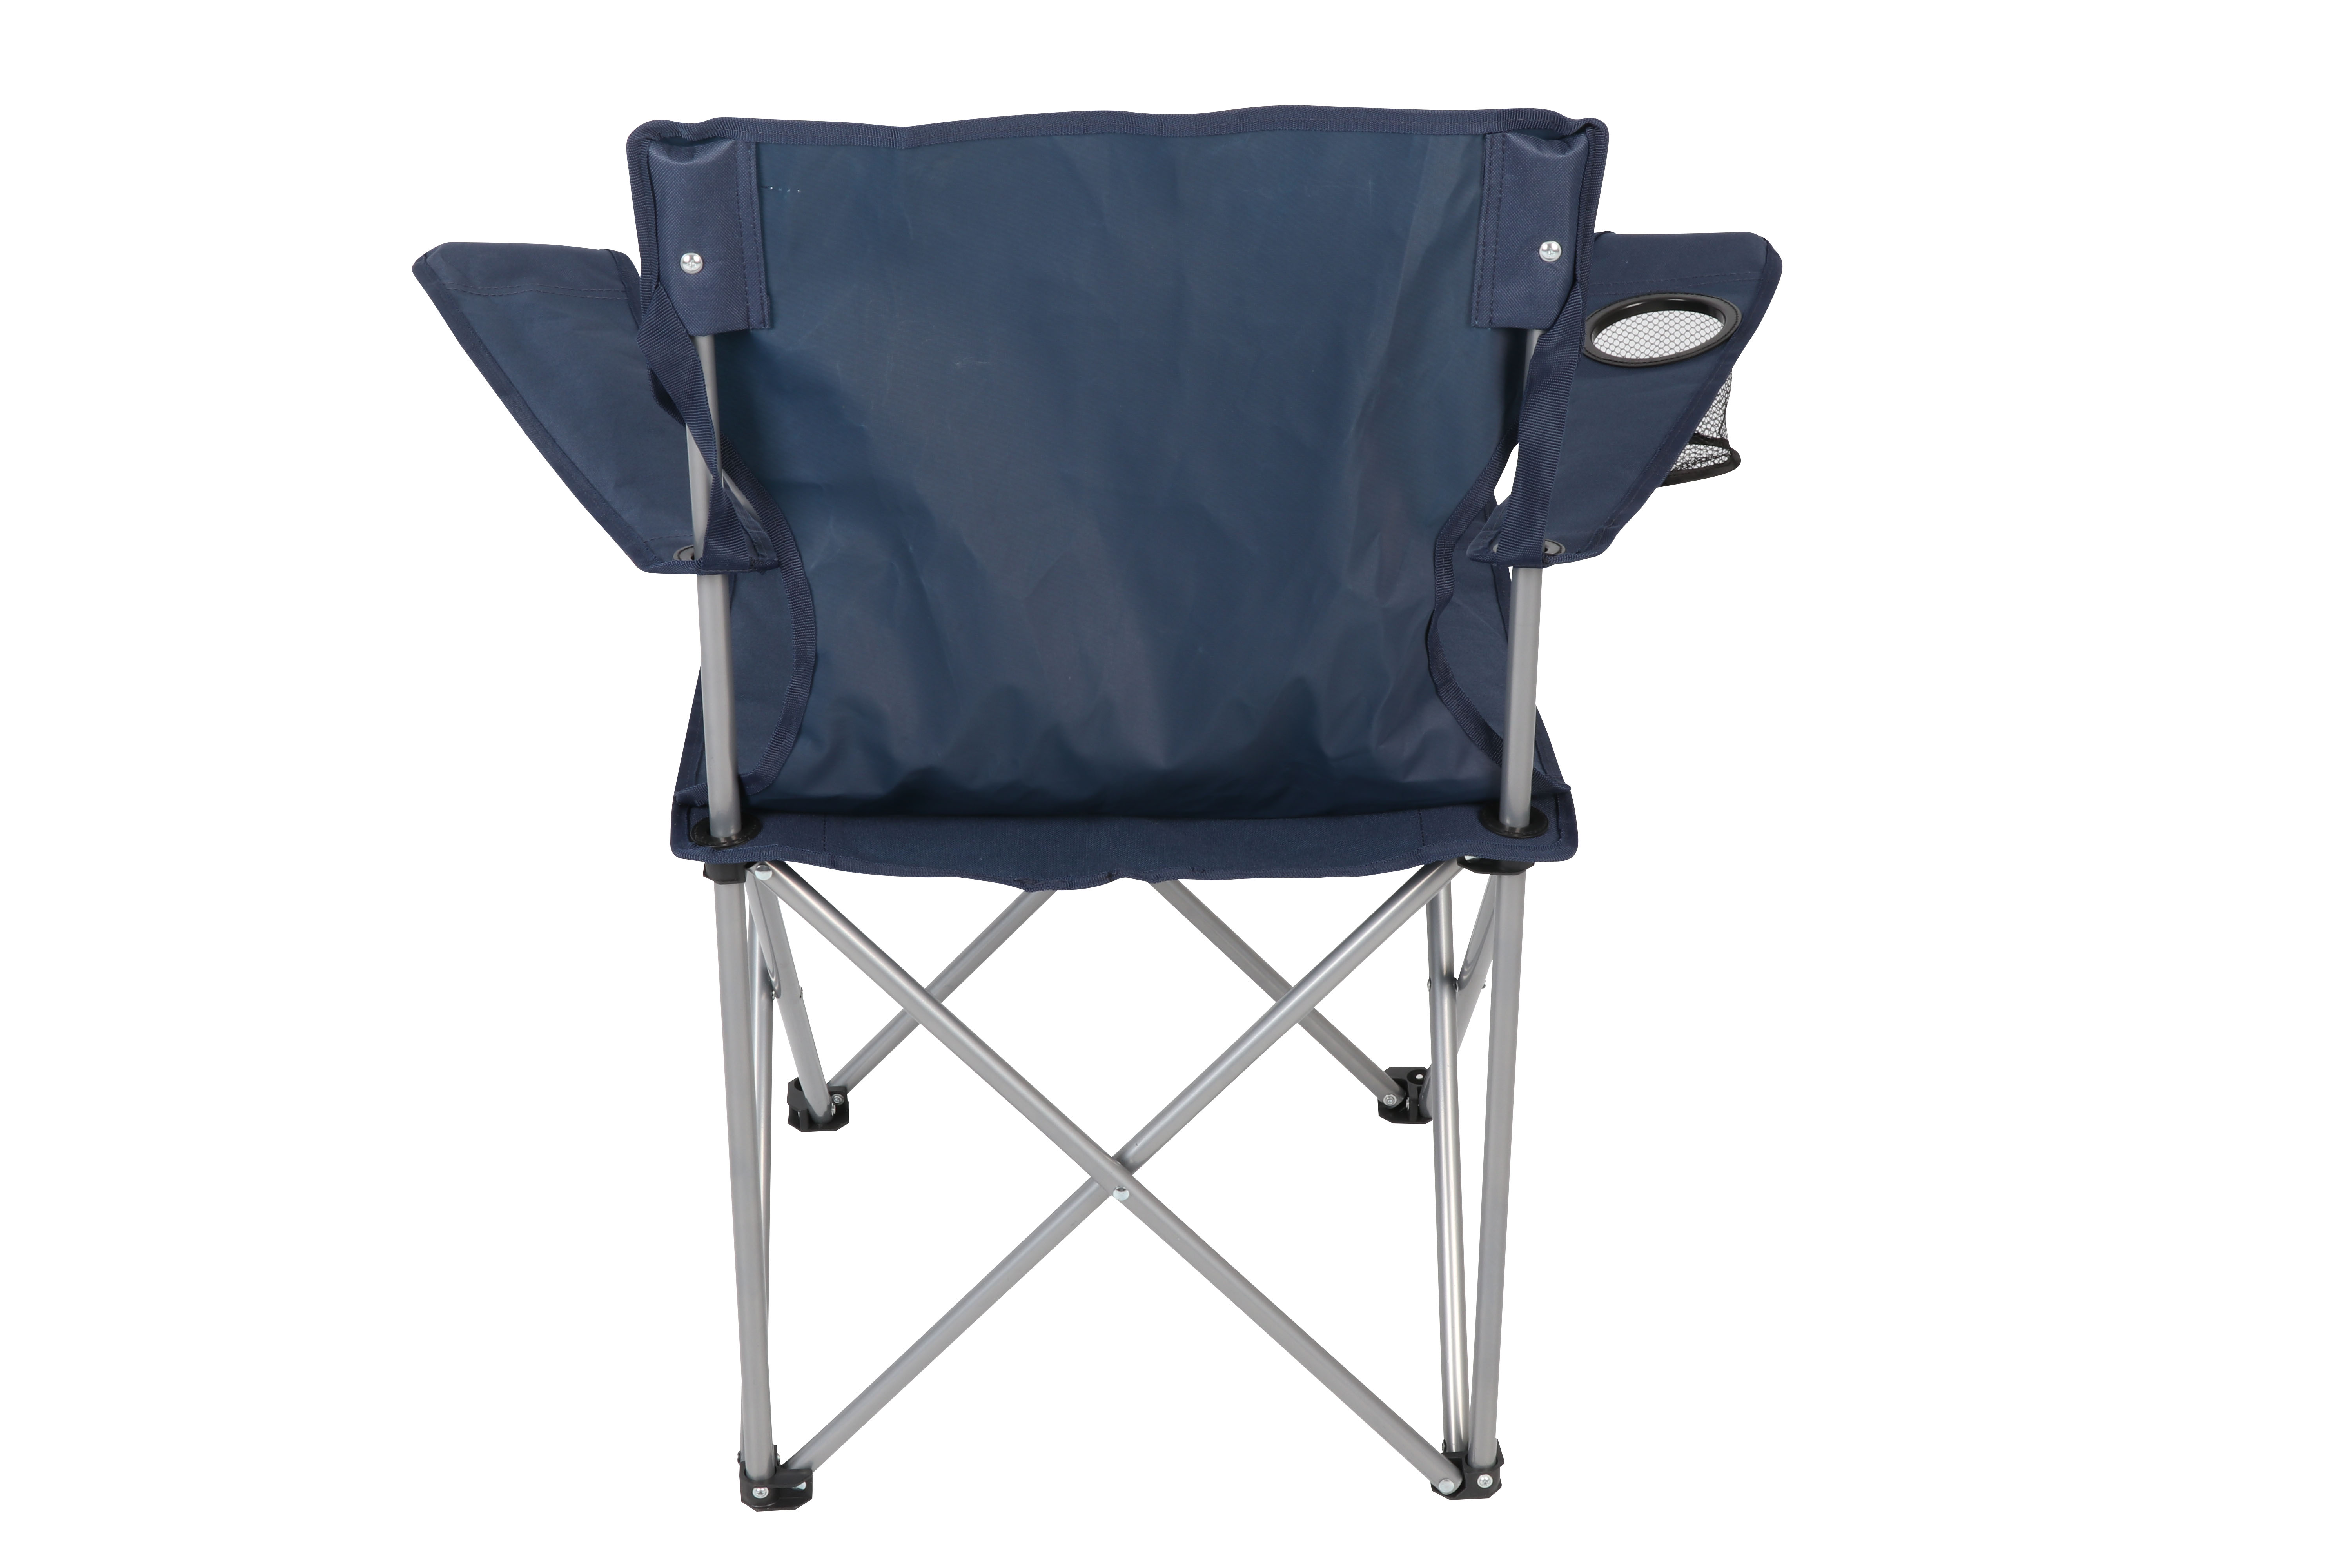 Ozark Trail Basic Quad Folding Camp Chair With Cup Holder, Blue, Adult - image 5 of 14